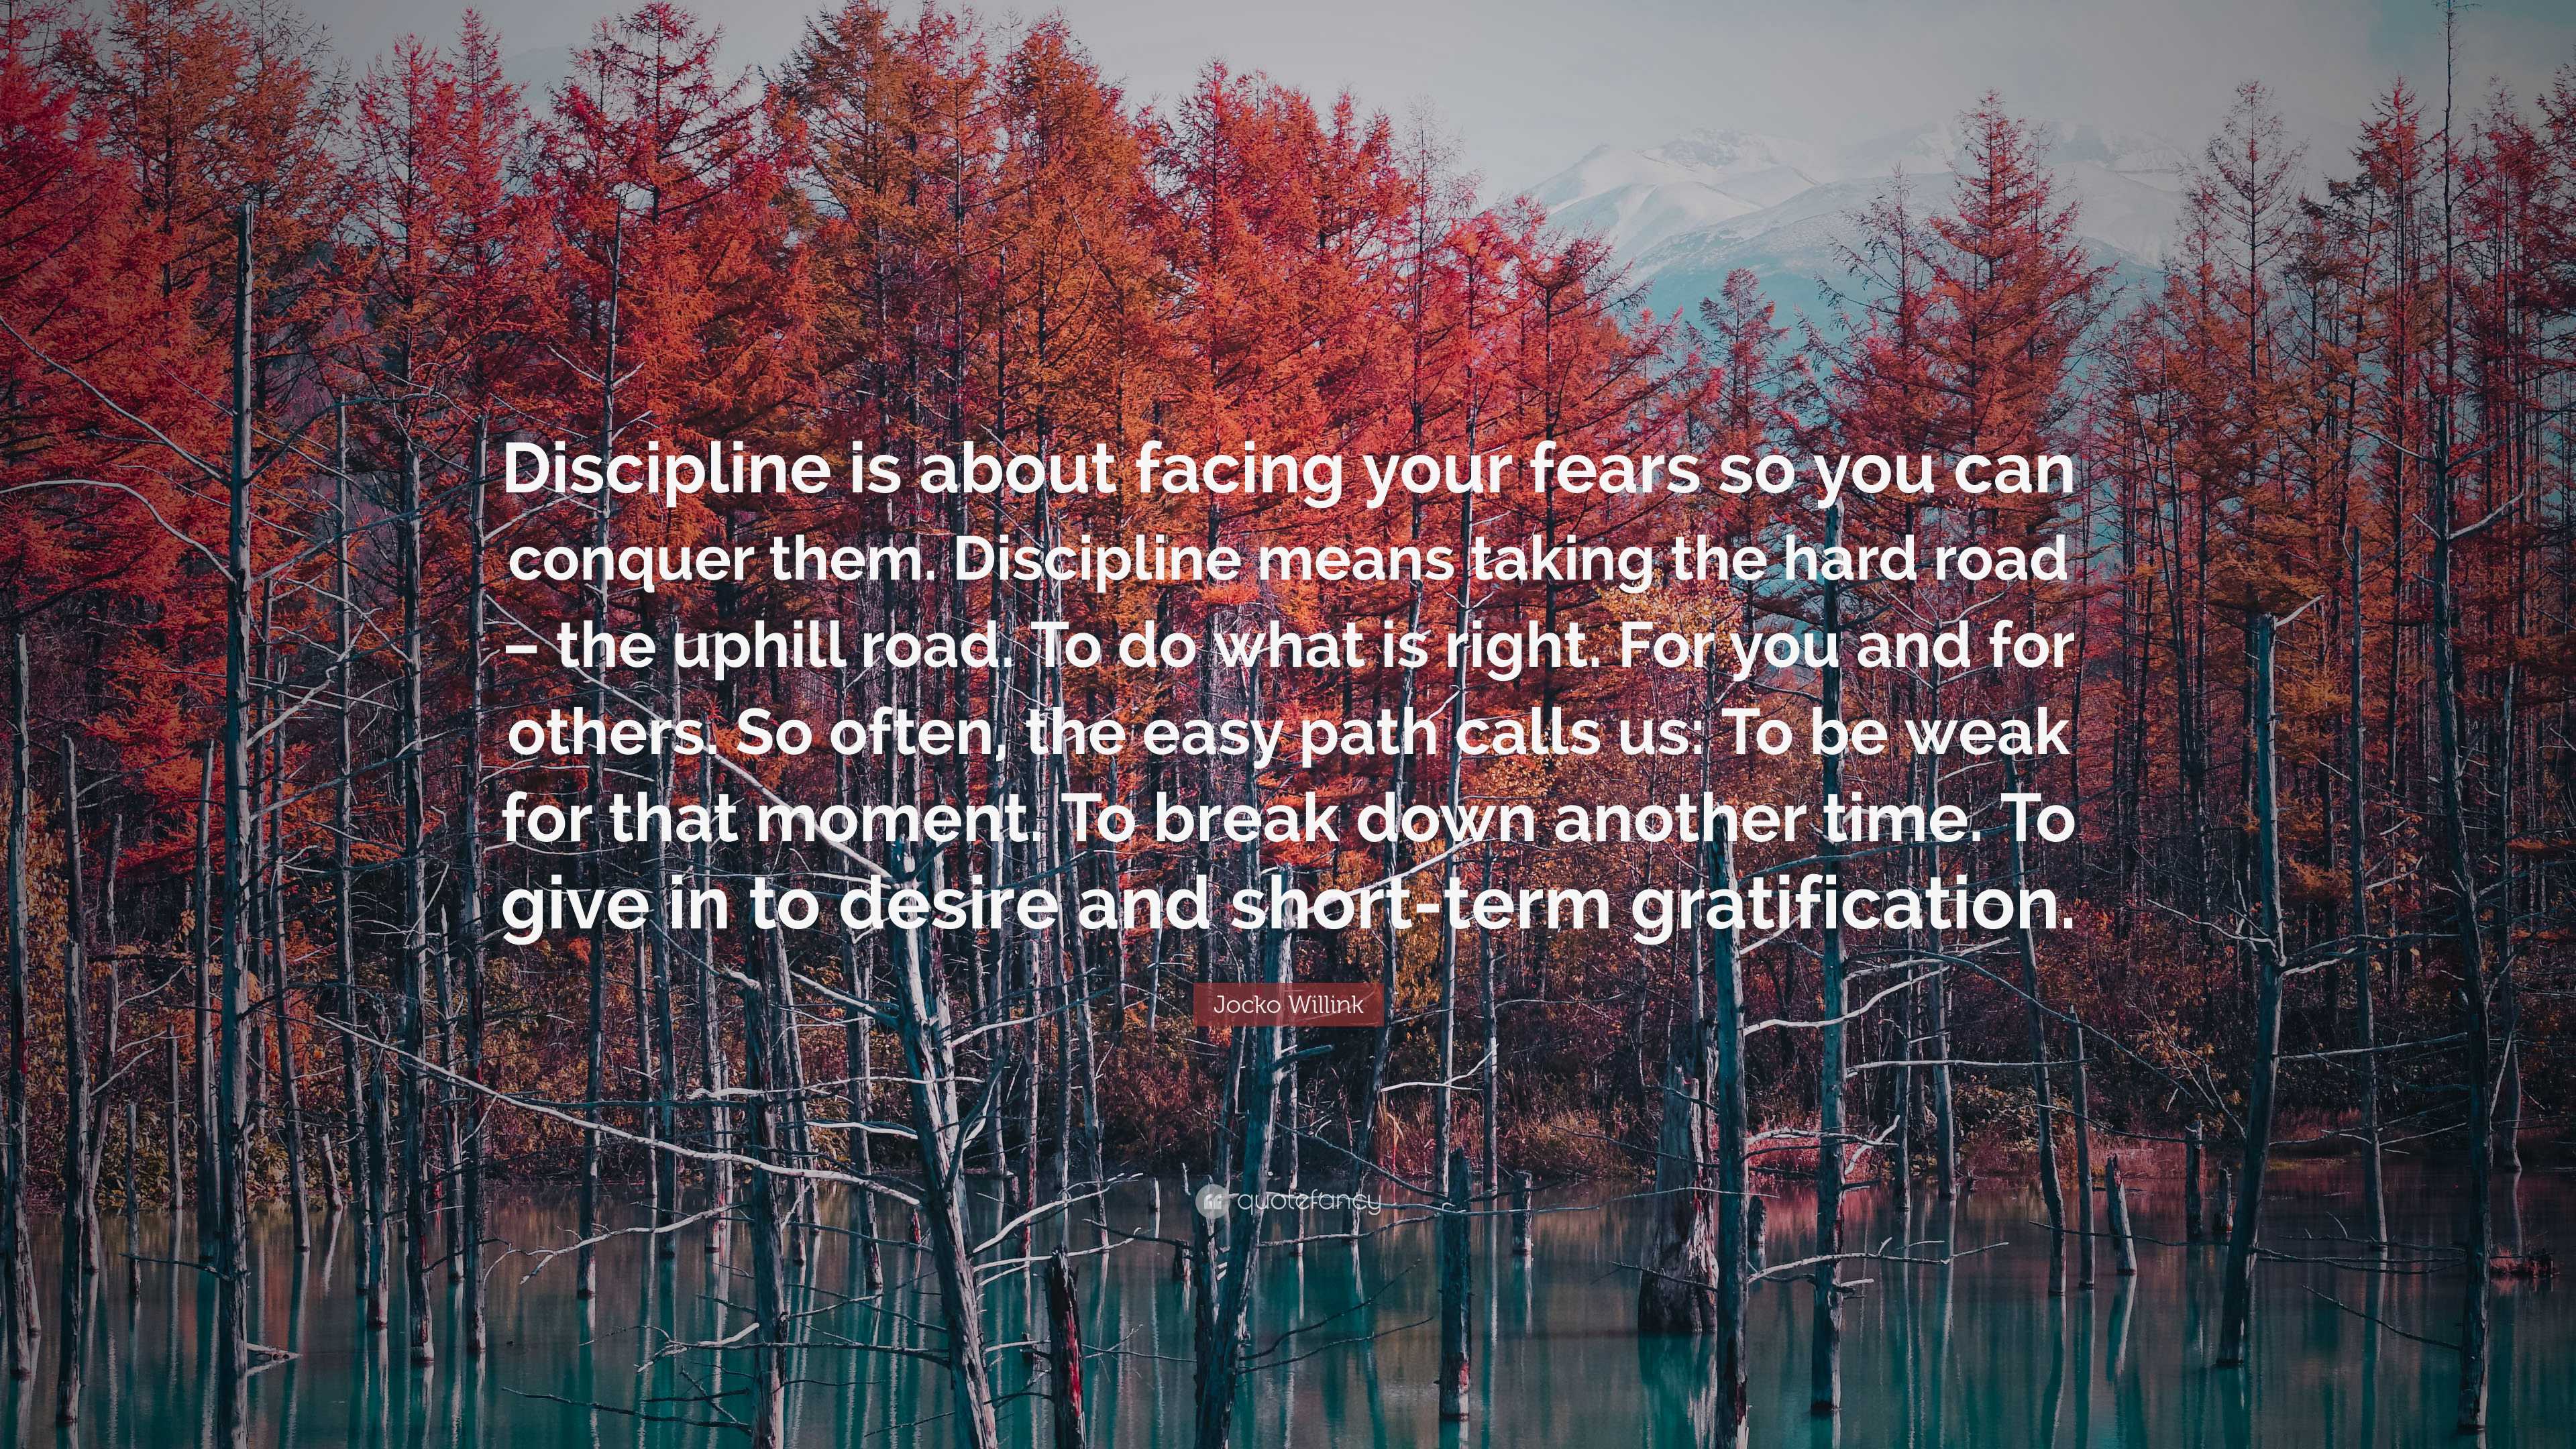 What does ''What is Your Discipline?'' mean?